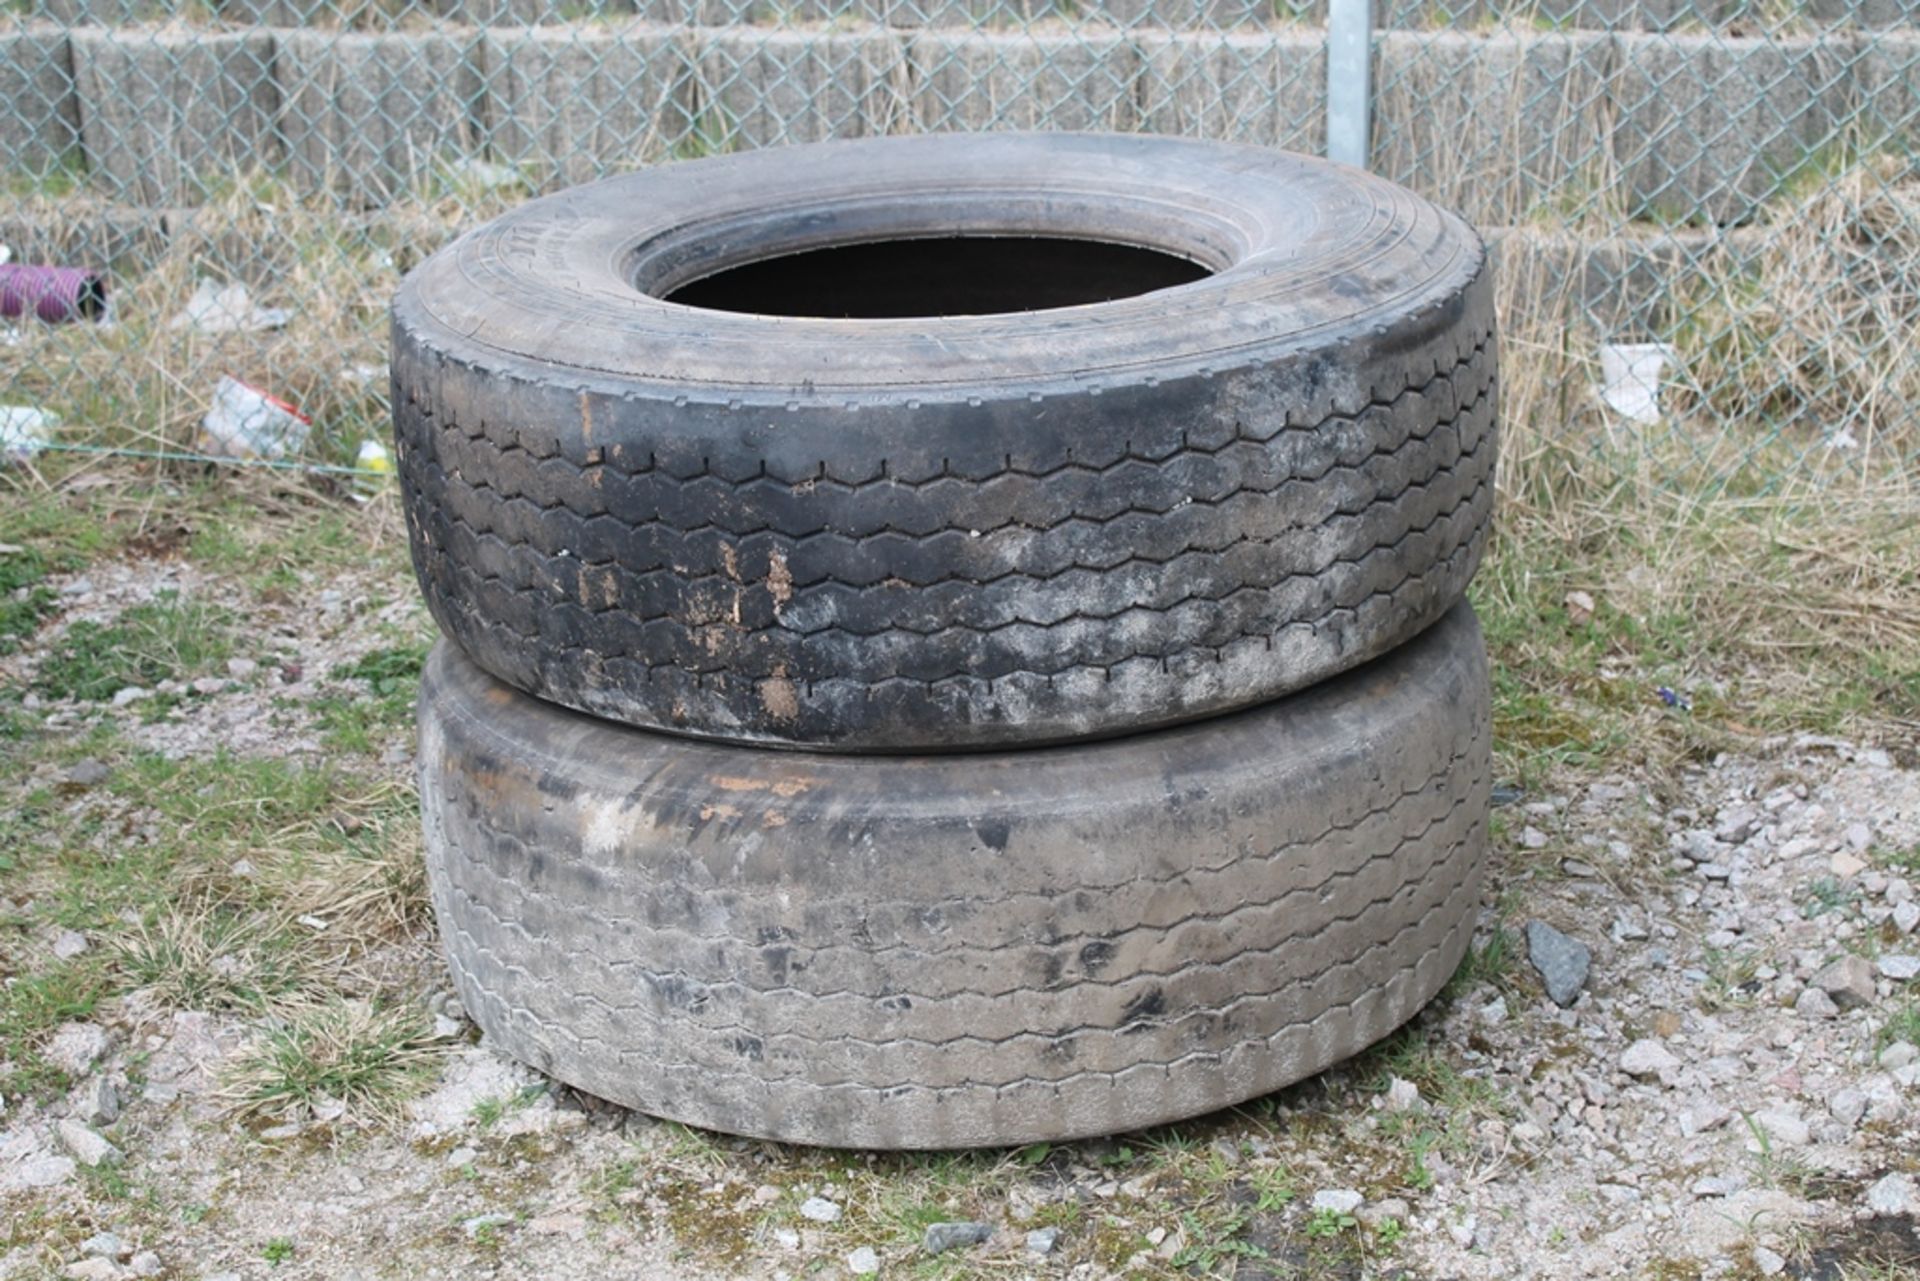 2 TYRES 385/65 R22.5